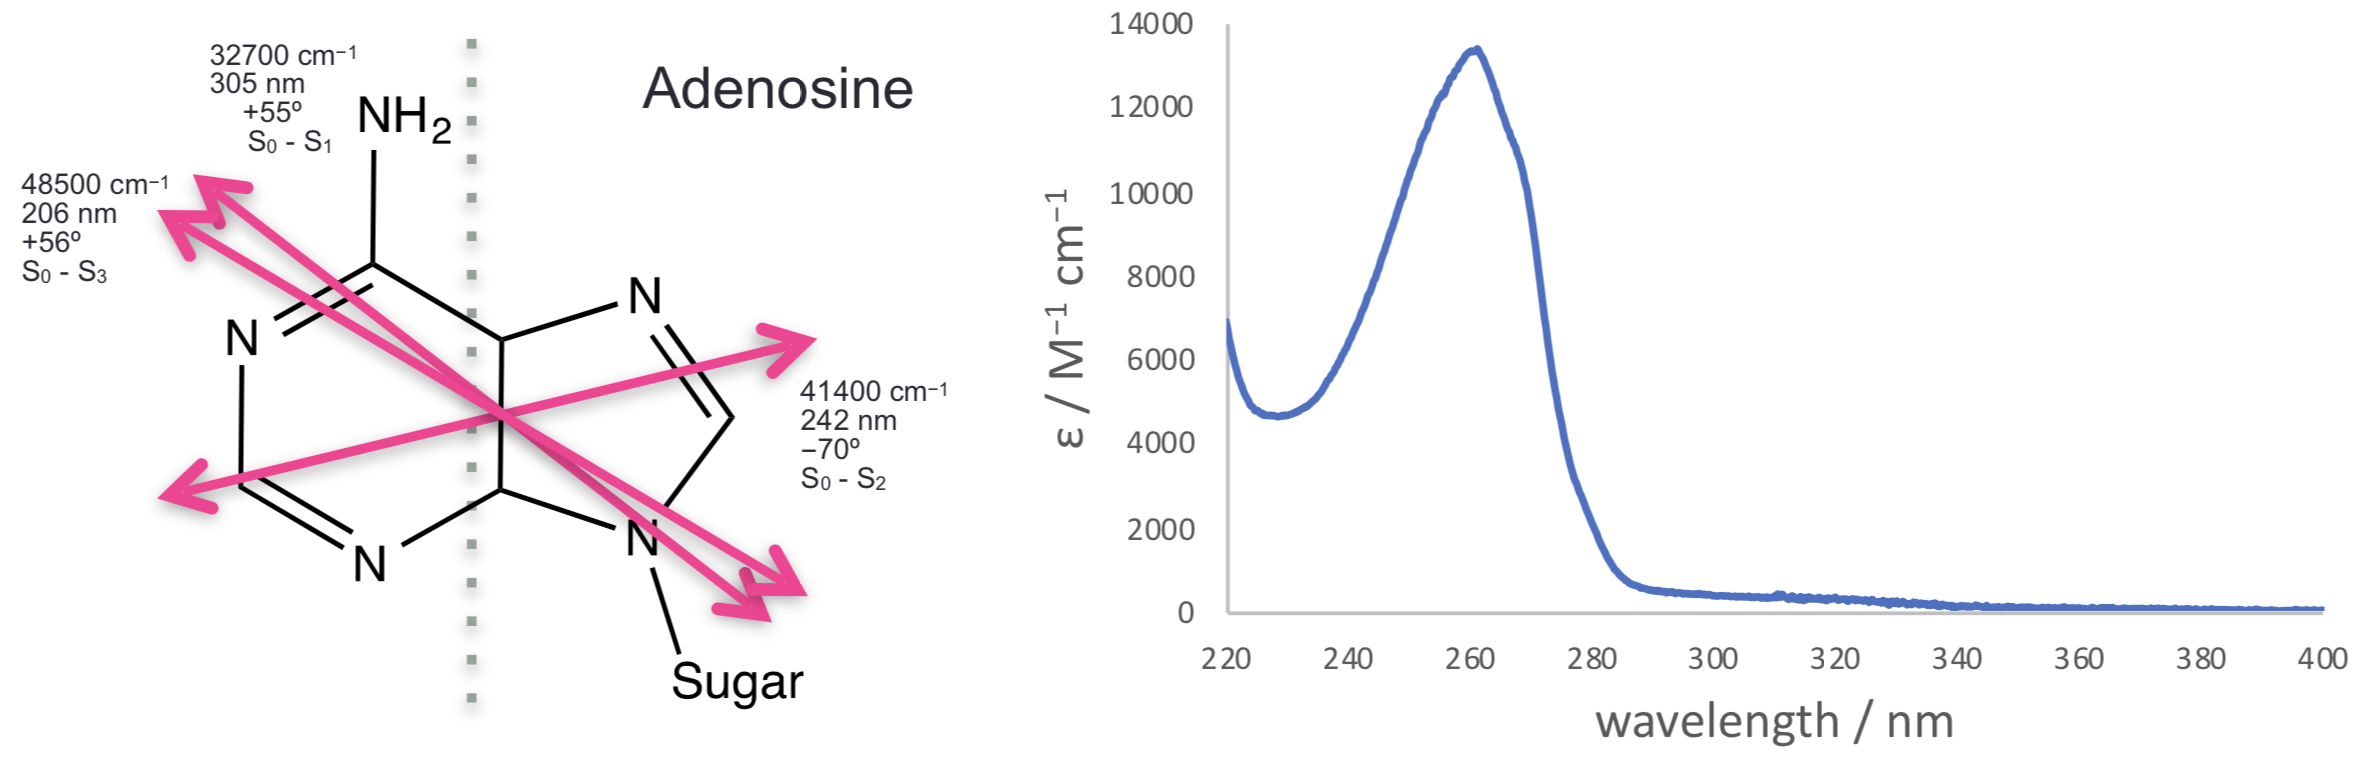 The three lowest energy transitions of adenosine each indicated with their transition dipole moment (all in the plane of the molecule, calculated values).These match with the observed spectrum with a weak transition around 310 nm, a much stronger transition around 260 nm and a third transition starting at the edge of the measured spectrum. [Spectrum [Adapted from OMLC]( https:// omlc.org/spectra/PhotochemCAD/html/033.html), 31st October 2018]